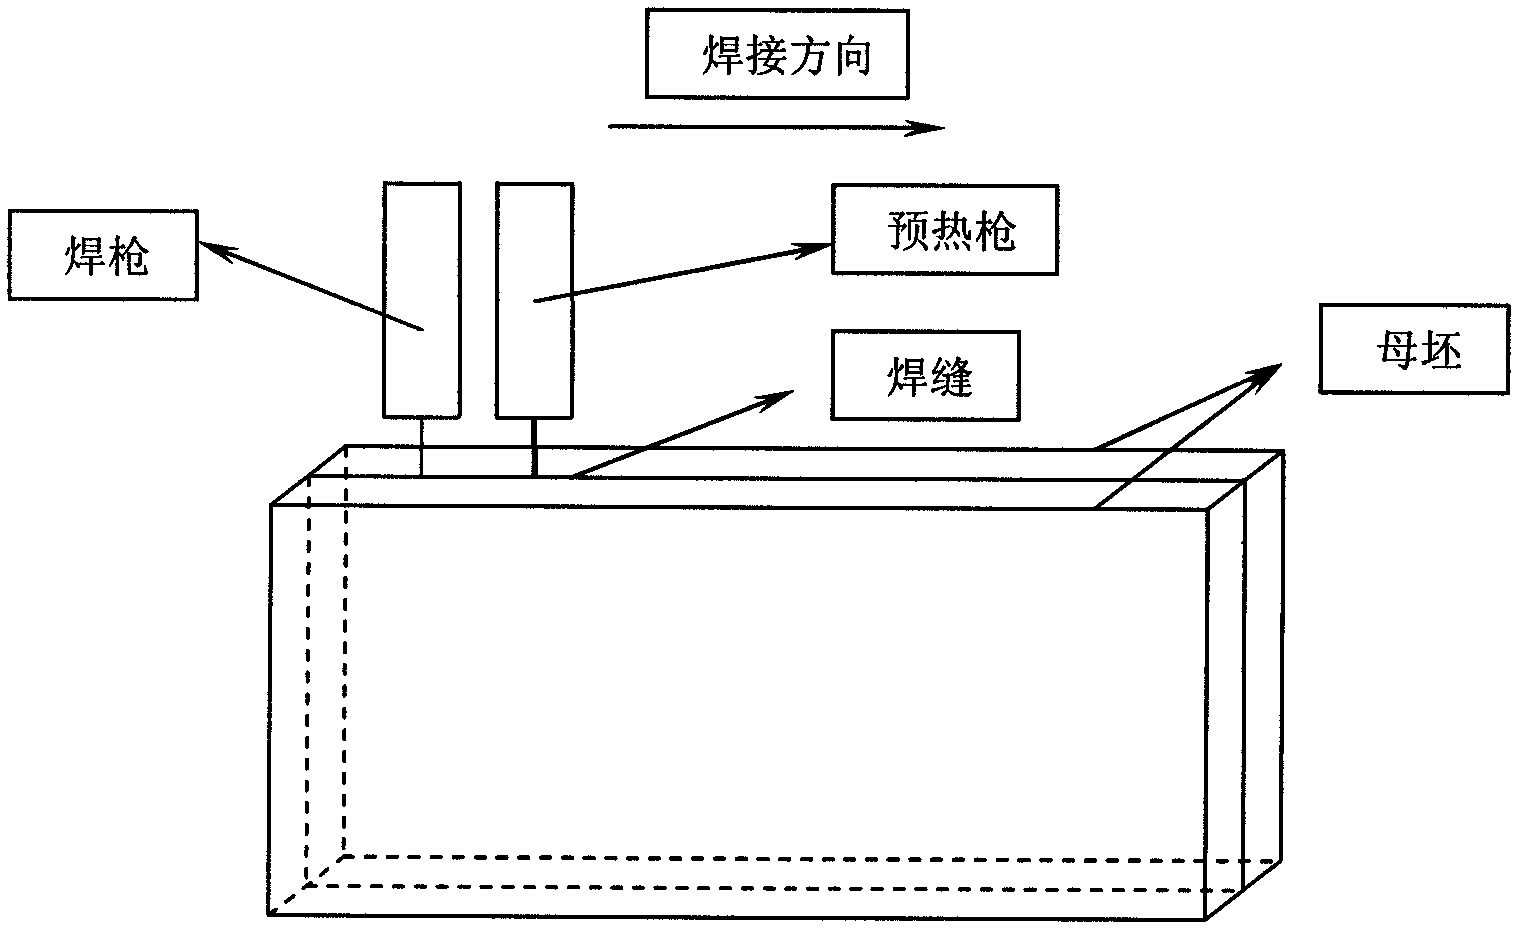 Manufacture method for cold-crack and high sensibility ultra-thick steel plate